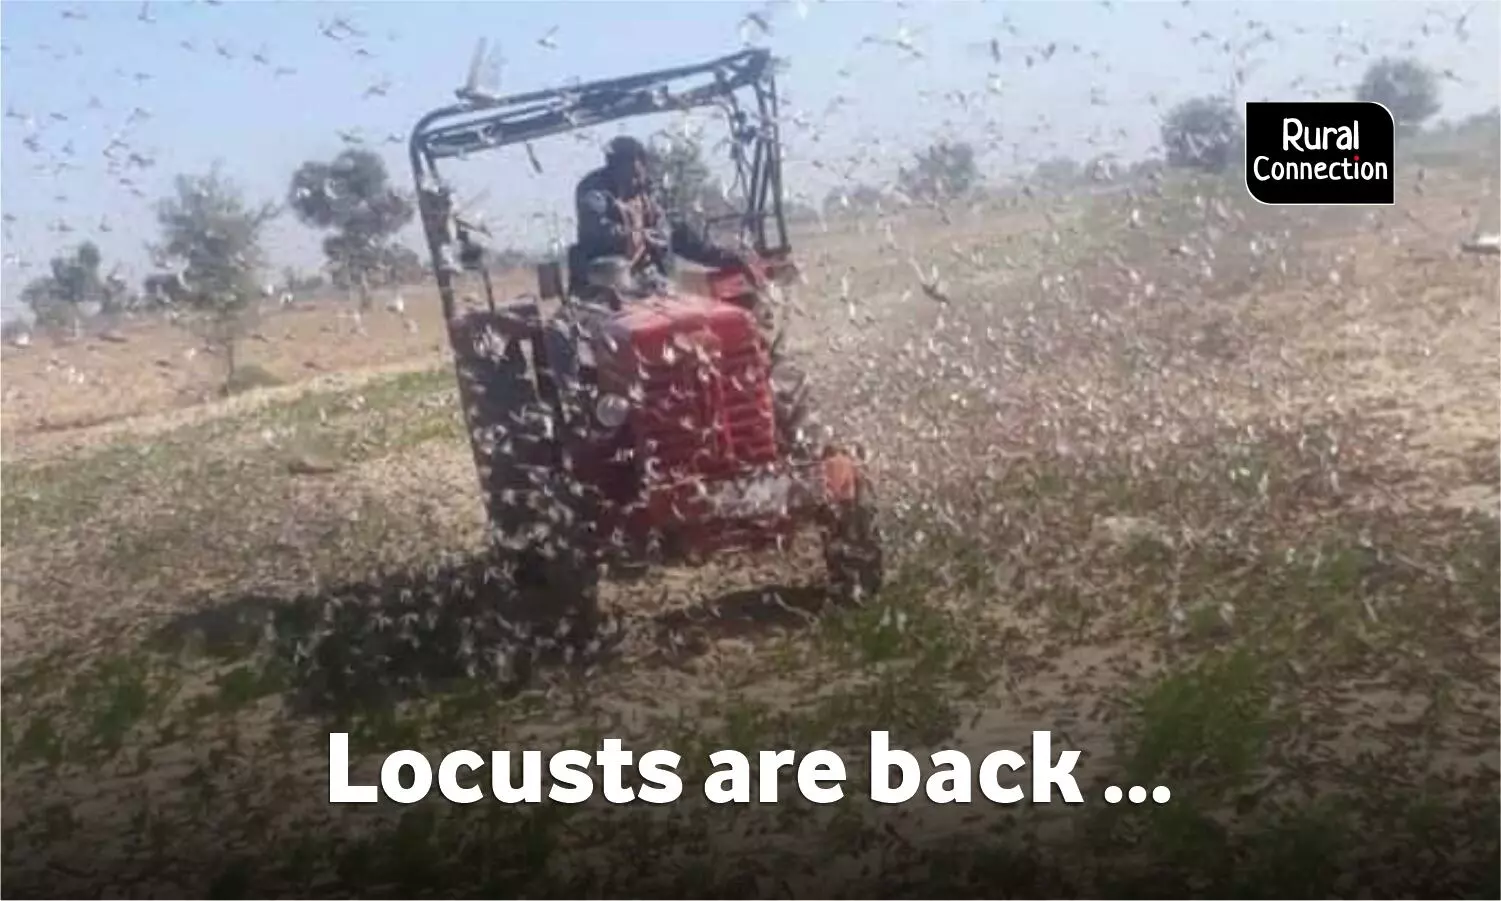 Warning issued for another round of locust attack in western Rajasthan